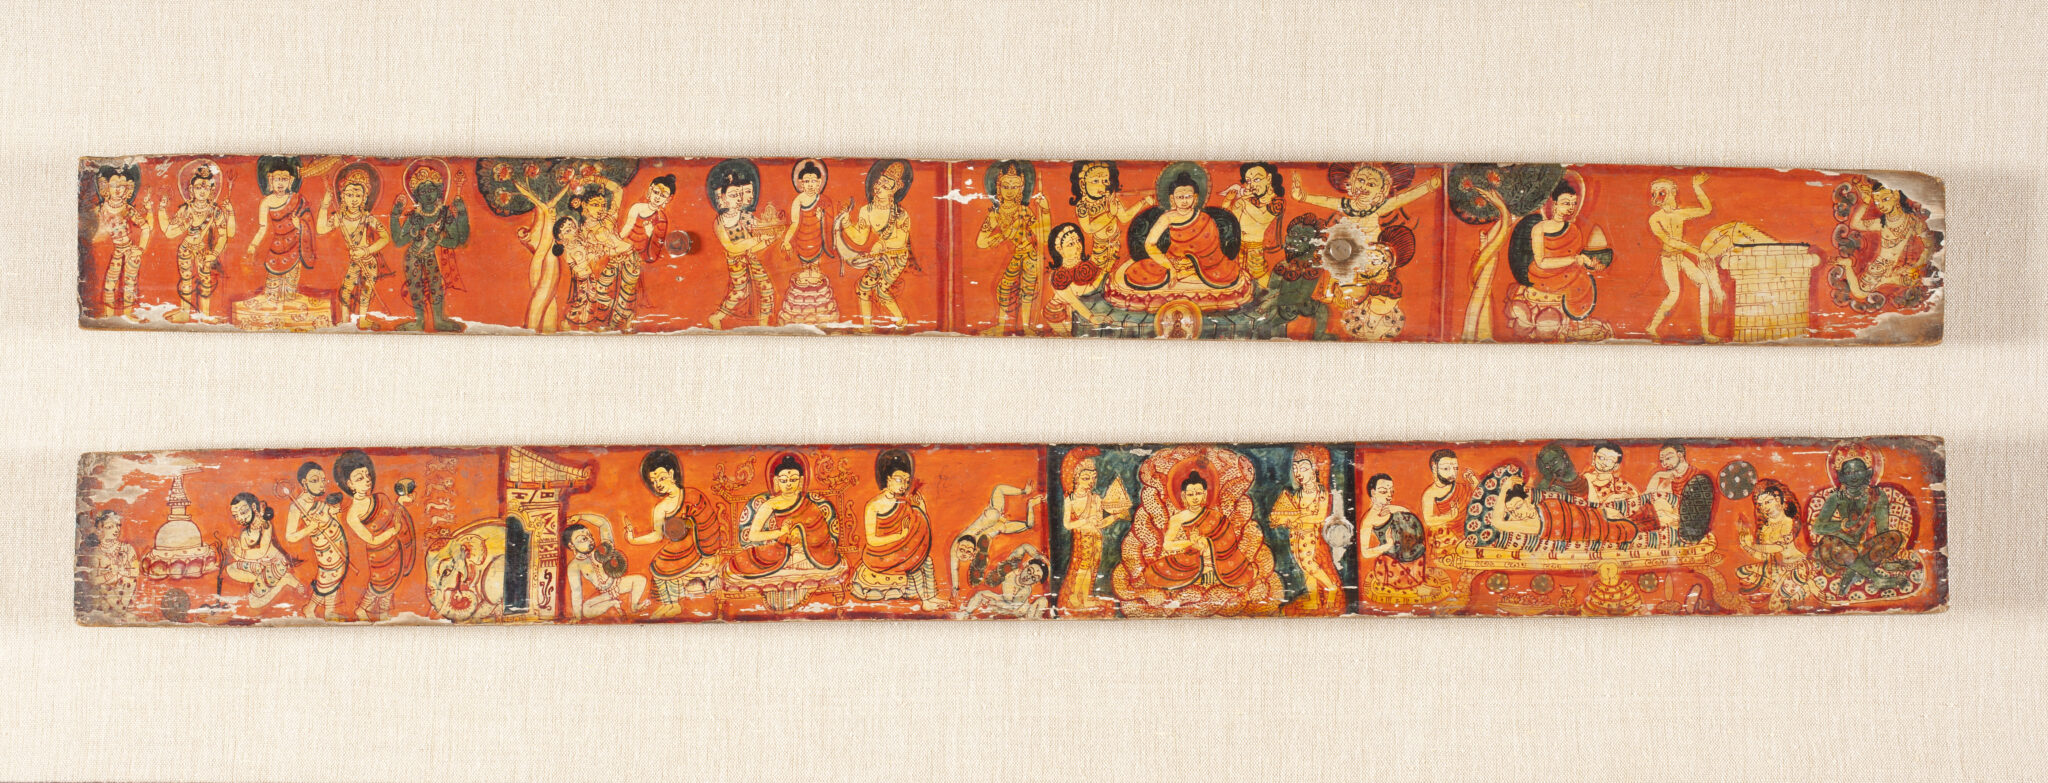 Two long rectangular manuscript covers decorated with proliferation of figures and scenes against orange backgrounds